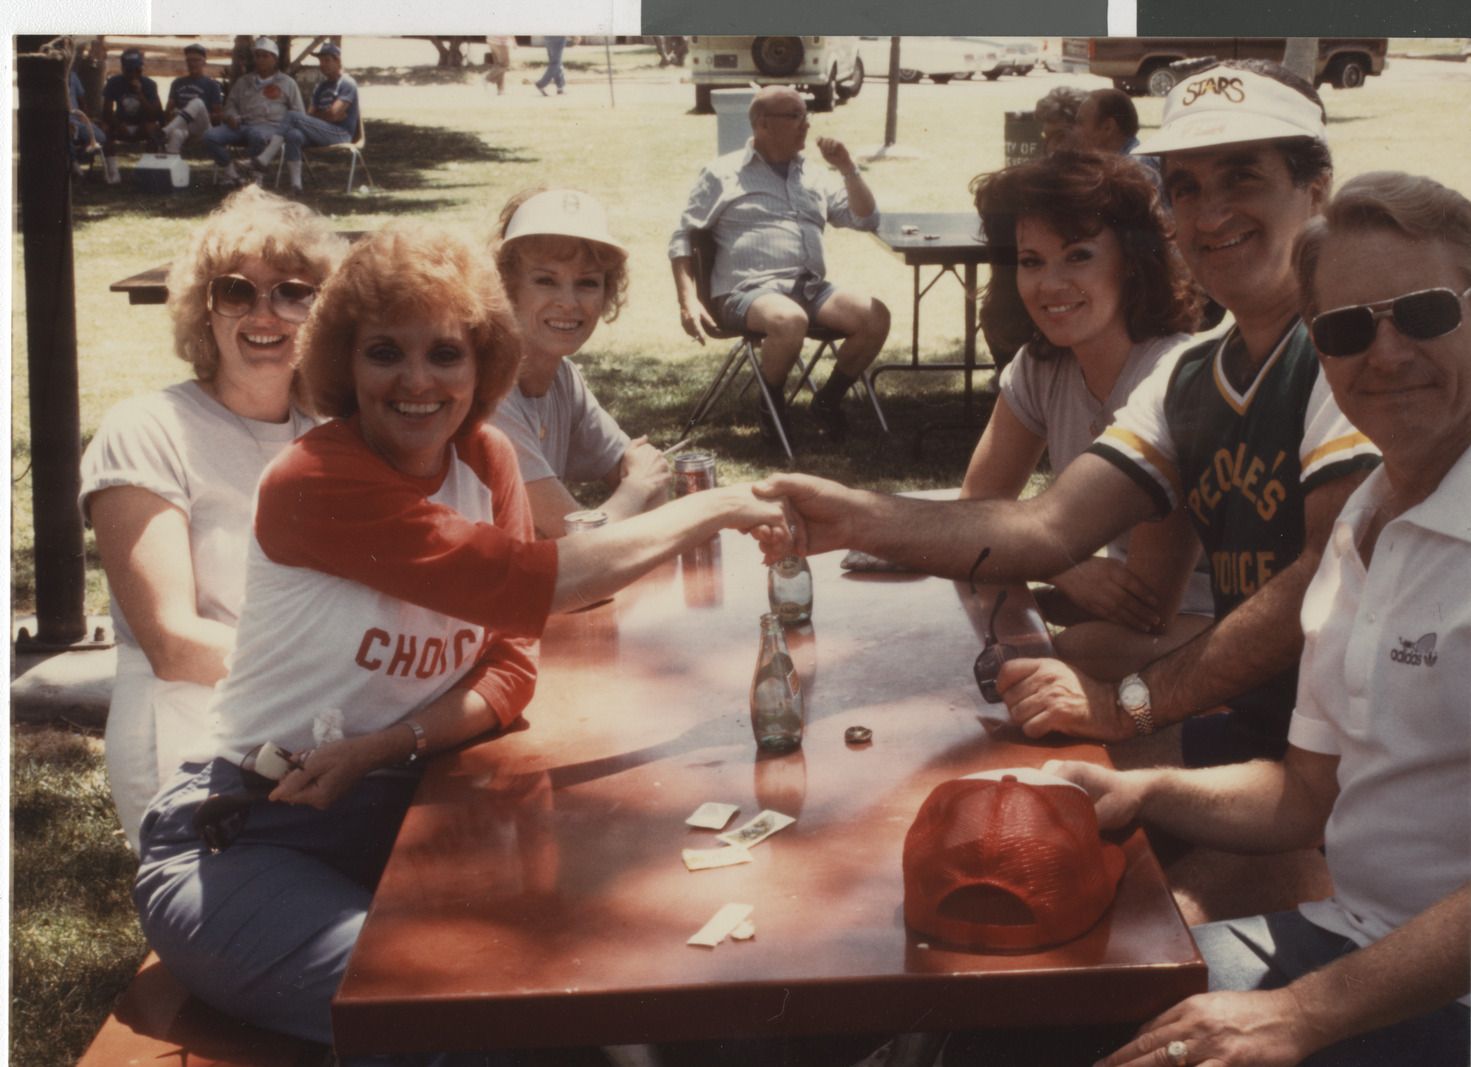 Photograph of Ron Lurie at a picnic table